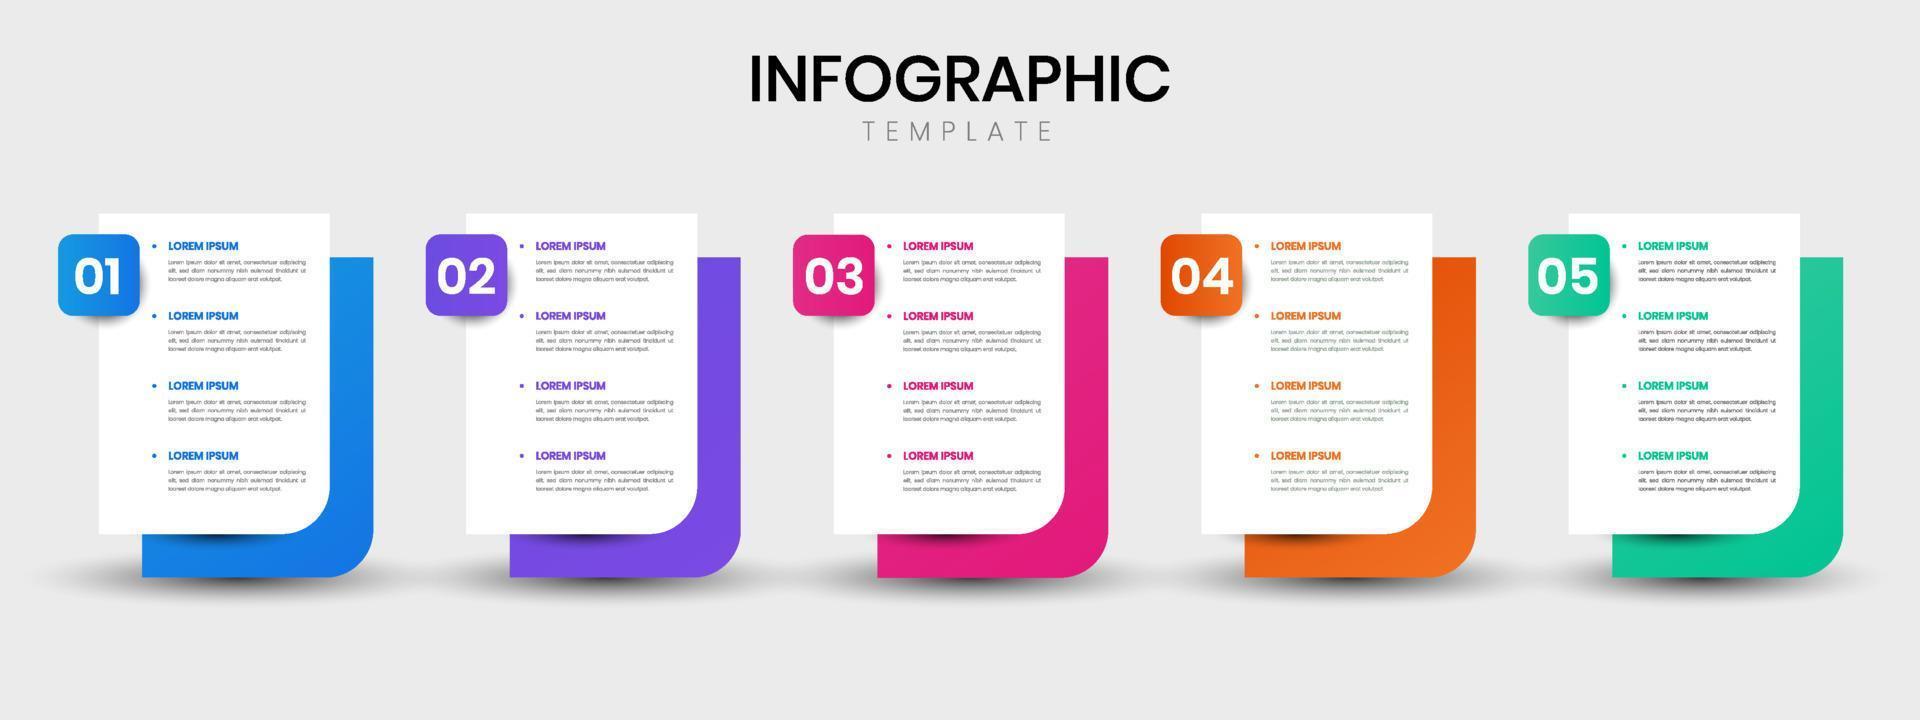 Business infographic thin line process with square template design with icons and 5 options or steps. Vector illustration.